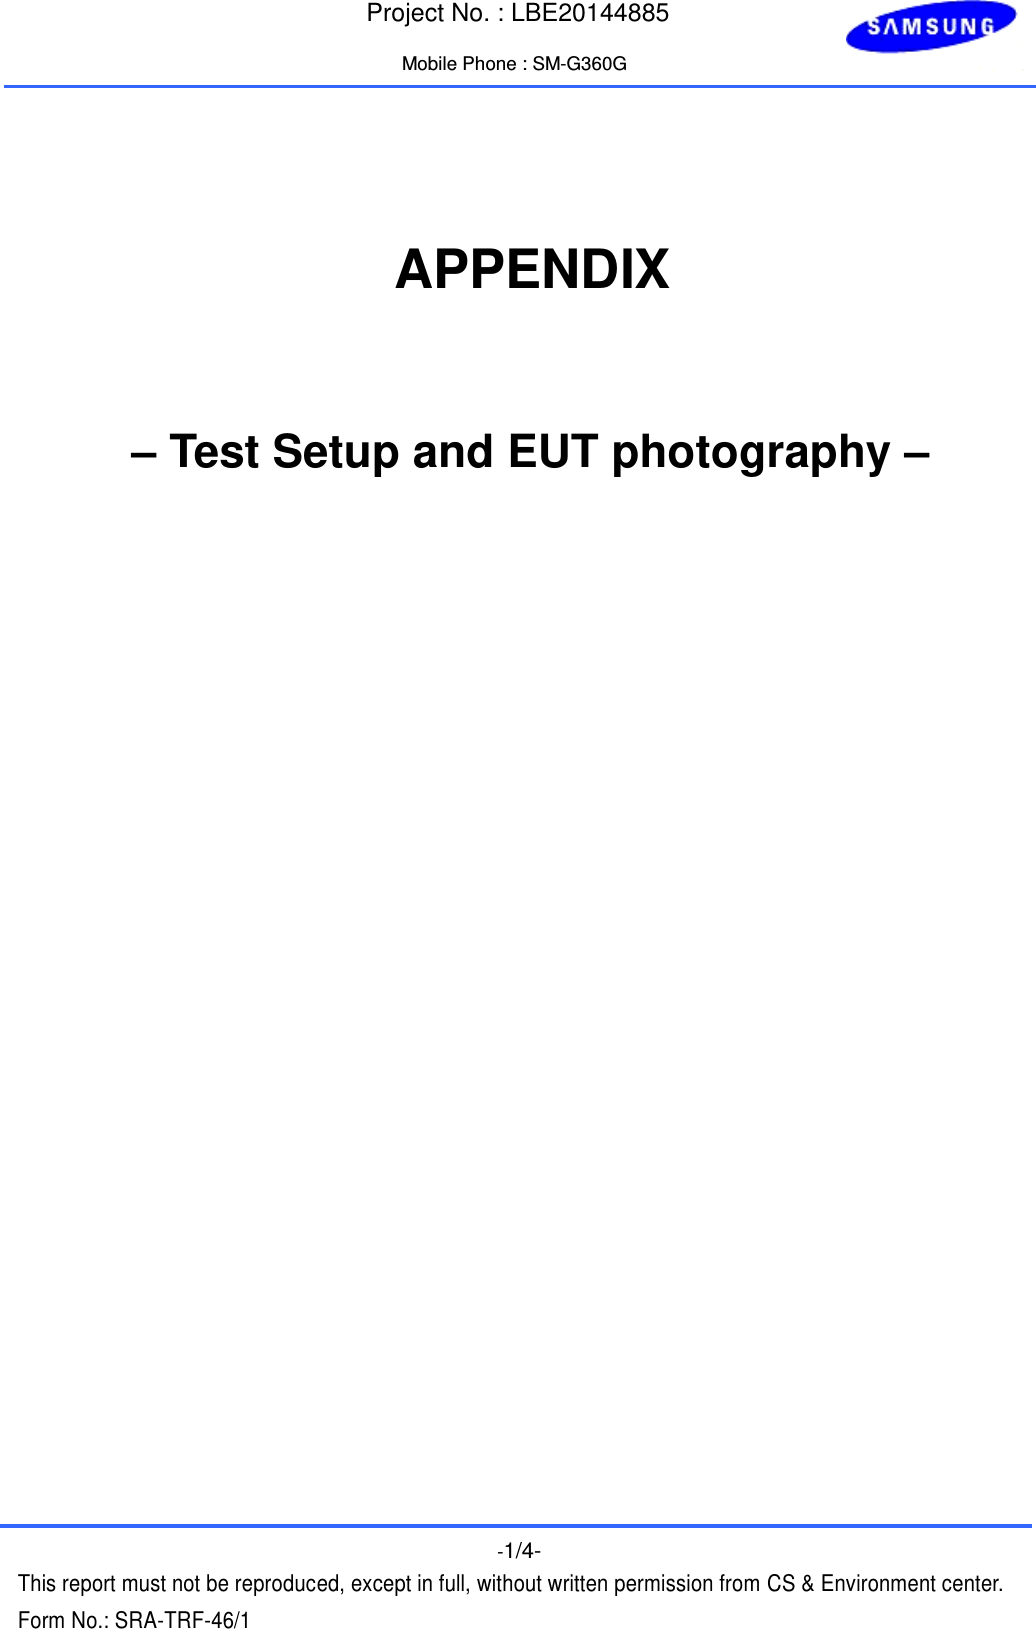  Project No. : LBE20144885  Mobile Phone : SM-G360G    -1/4- This report must not be reproduced, except in full, without written permission from CS &amp; Environment center. Form No.: SRA-TRF-46/1     APPENDIX   – Test Setup and EUT photography – 